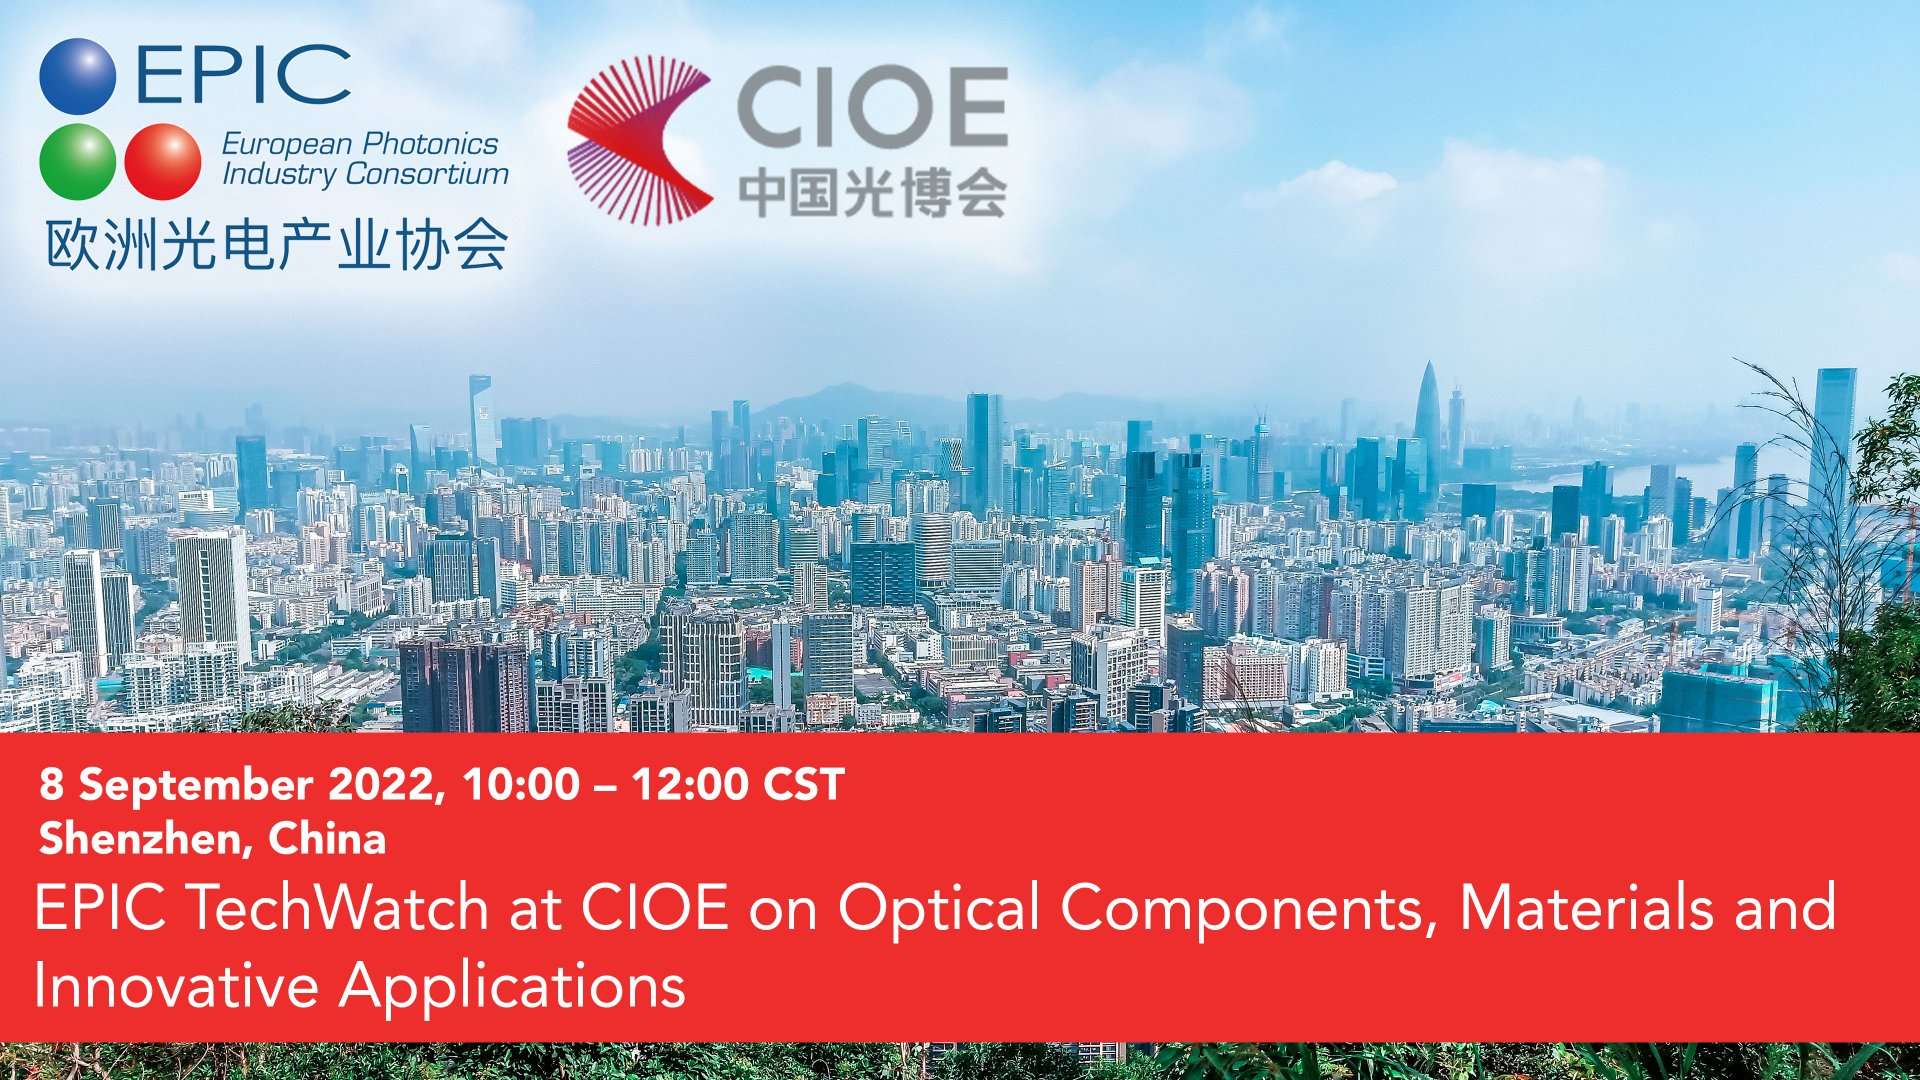 EPIC TechWatch at CIOE on Optical Components, Materials and Innovative Applications